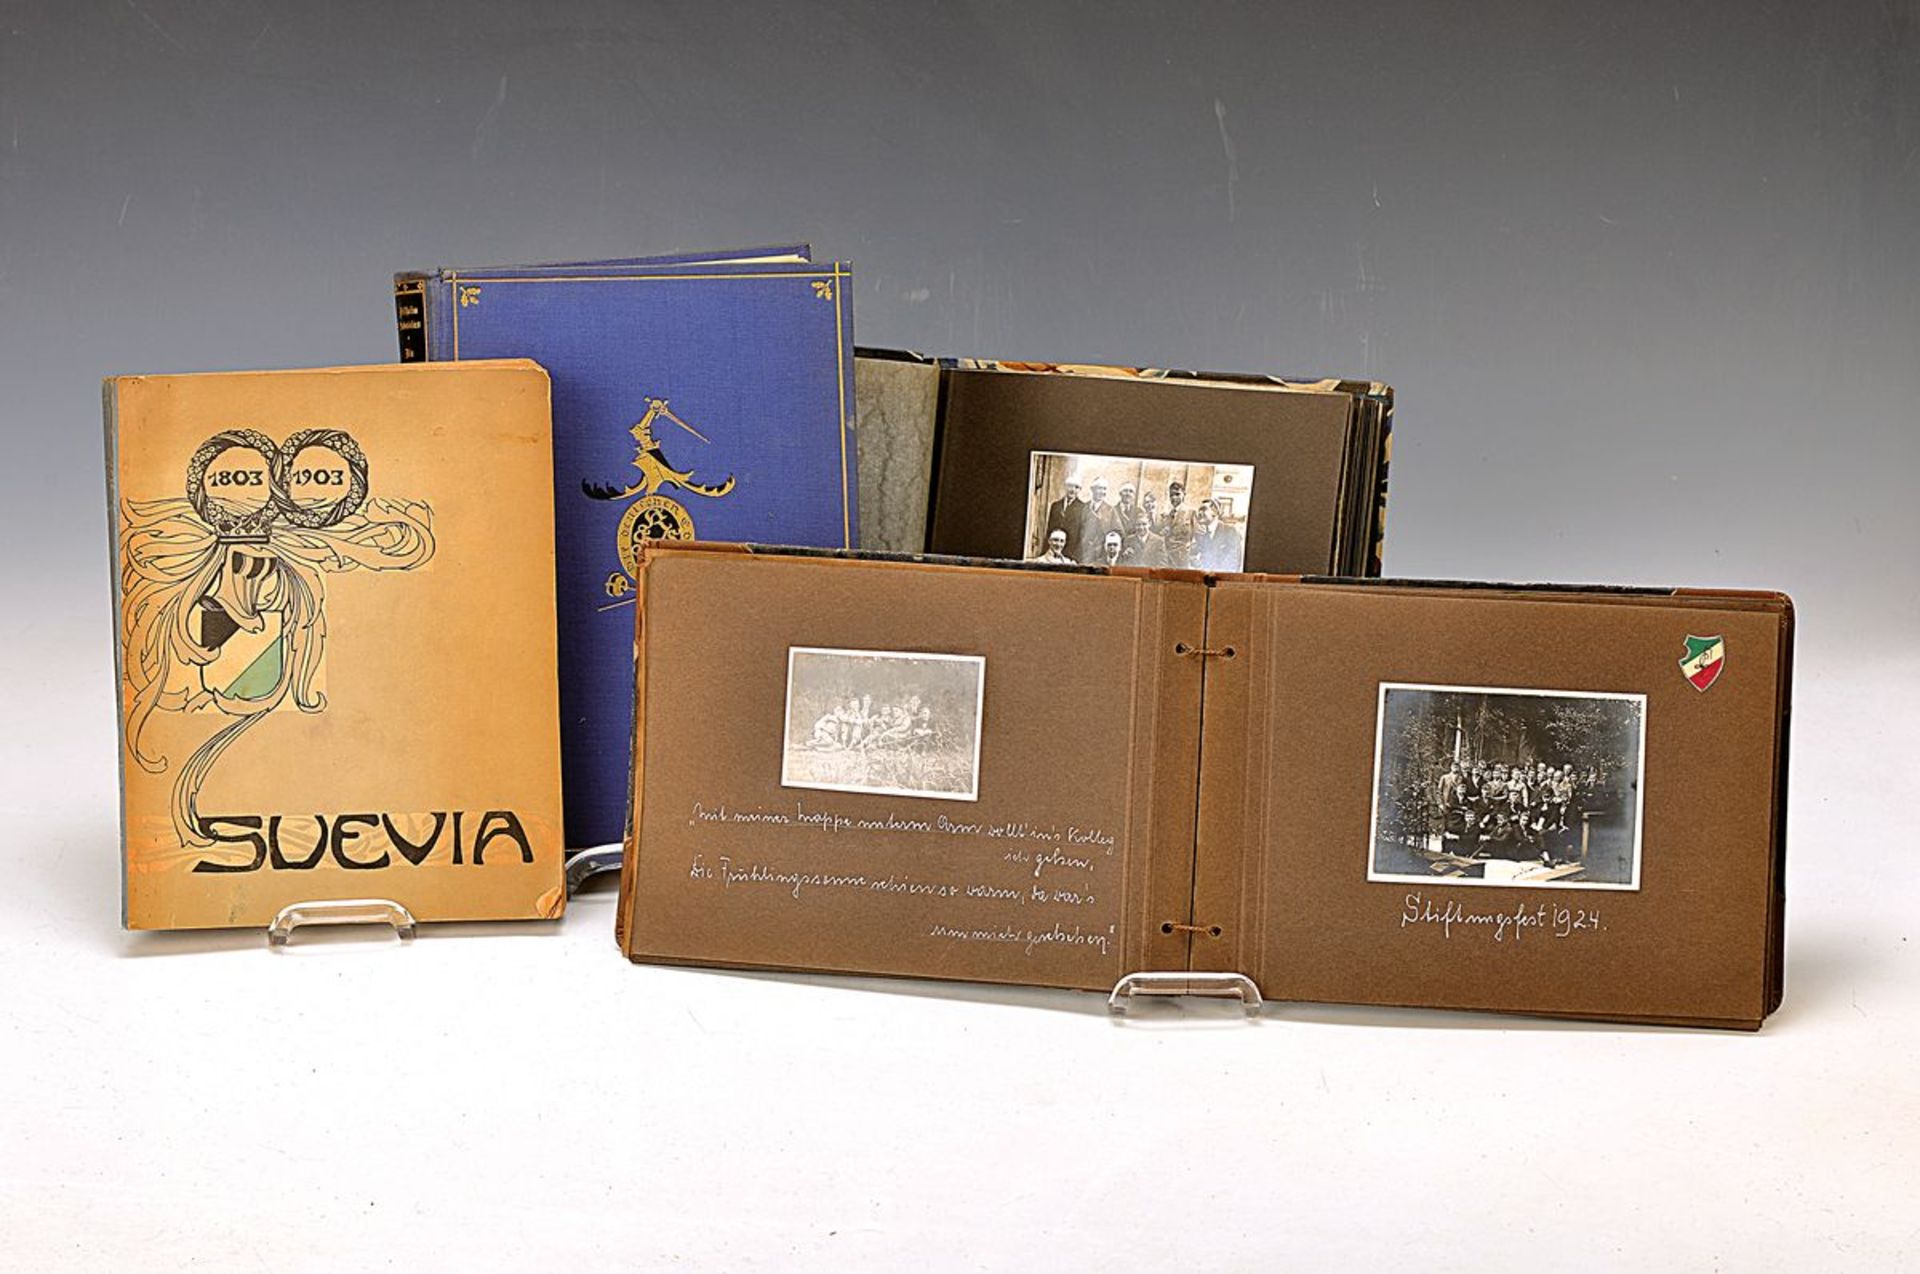 2 photo albums of the years of study and four books fraternity, fellow students and experiences of